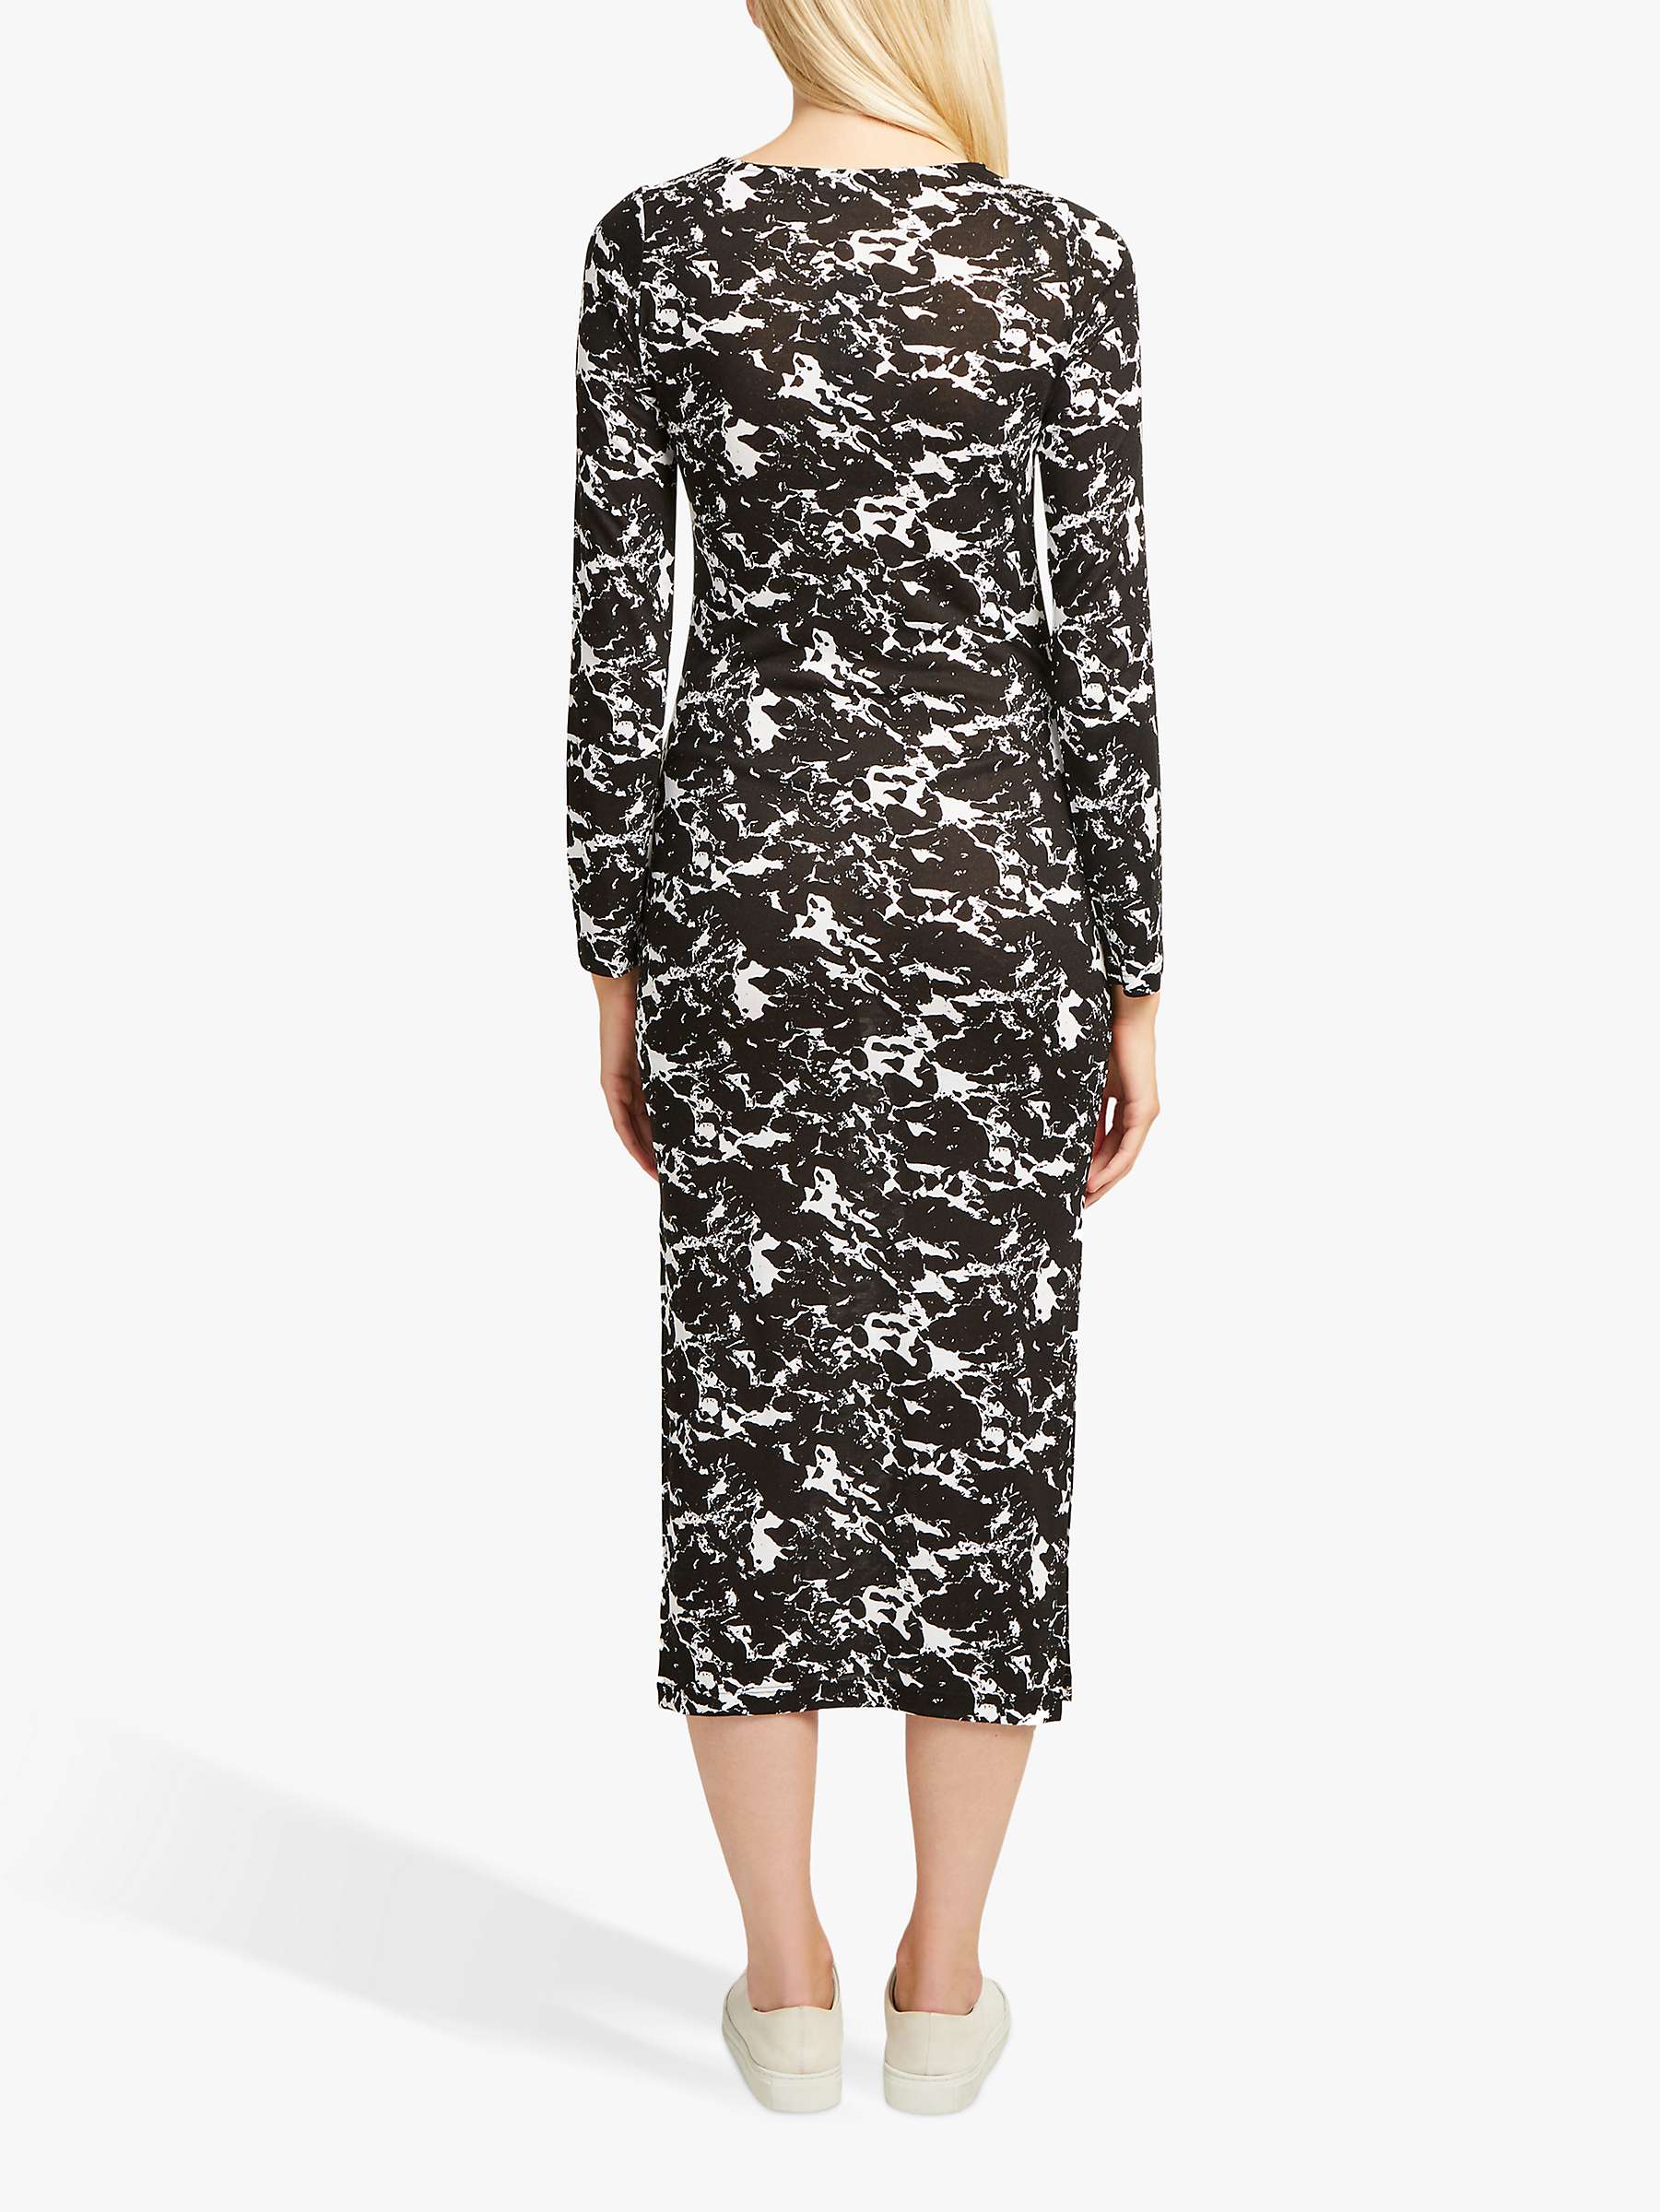 Buy French Connection Lawson Print Dress, Black/White Online at johnlewis.com